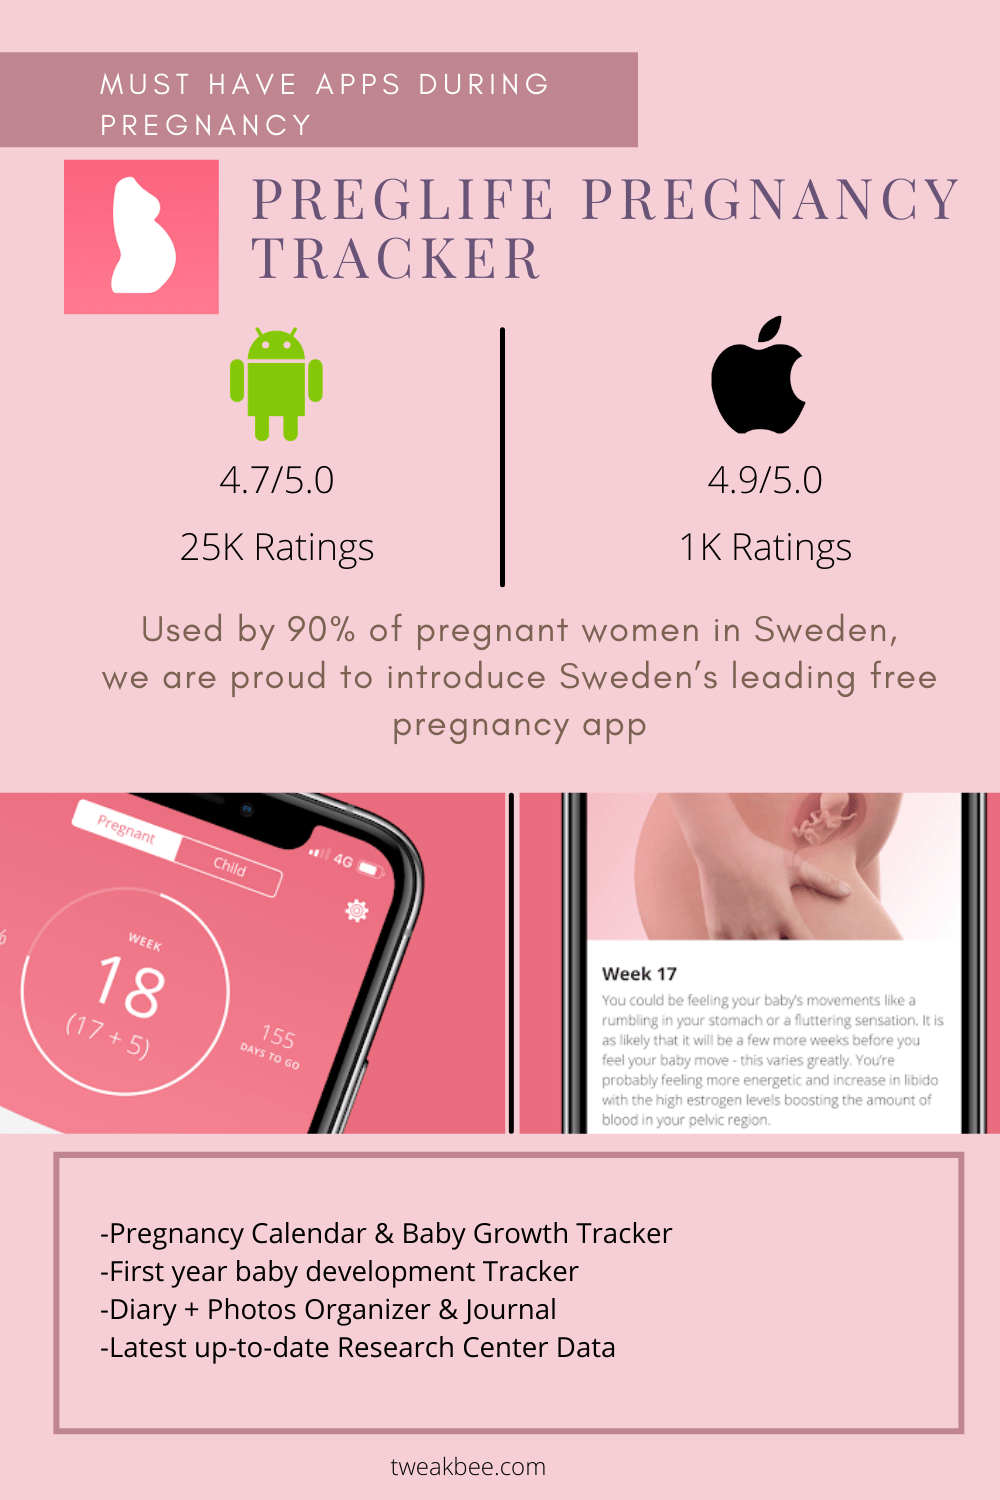 Preglife Pregnancy Tracker - Must Have Apps During Pregnancy